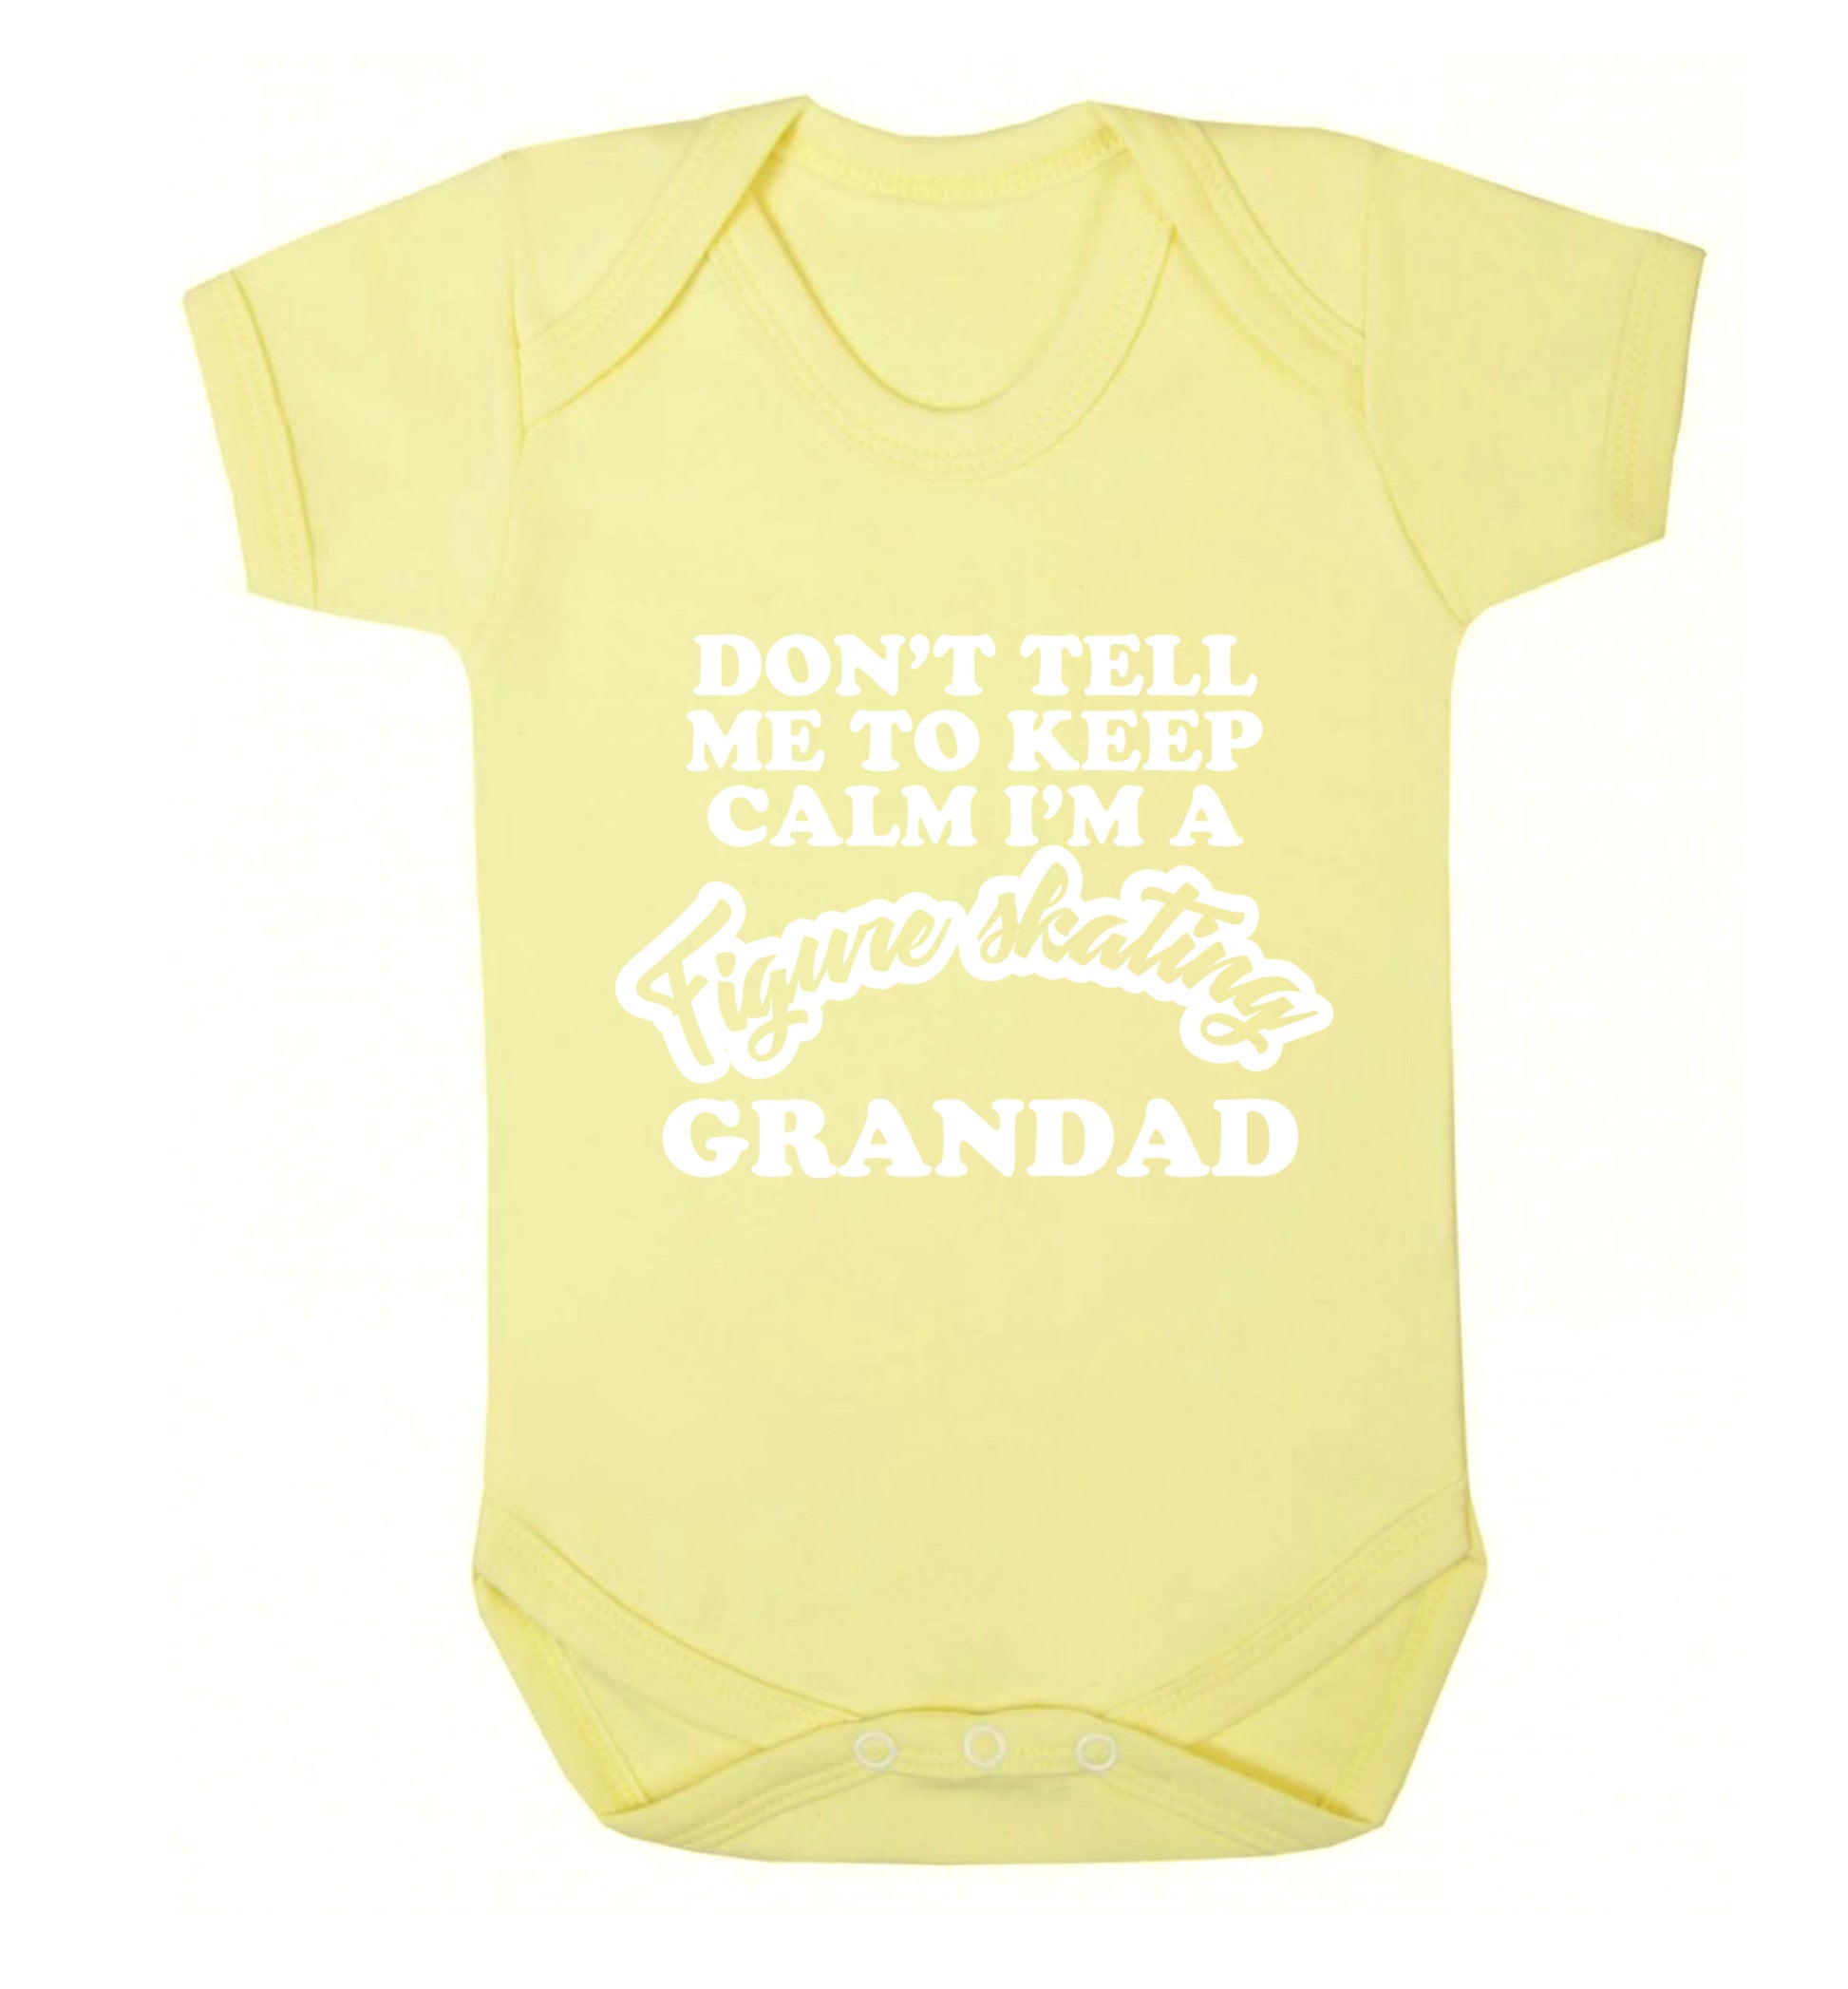 Don't tell me to keep calm I'm a figure skating grandad Baby Vest pale yellow 18-24 months